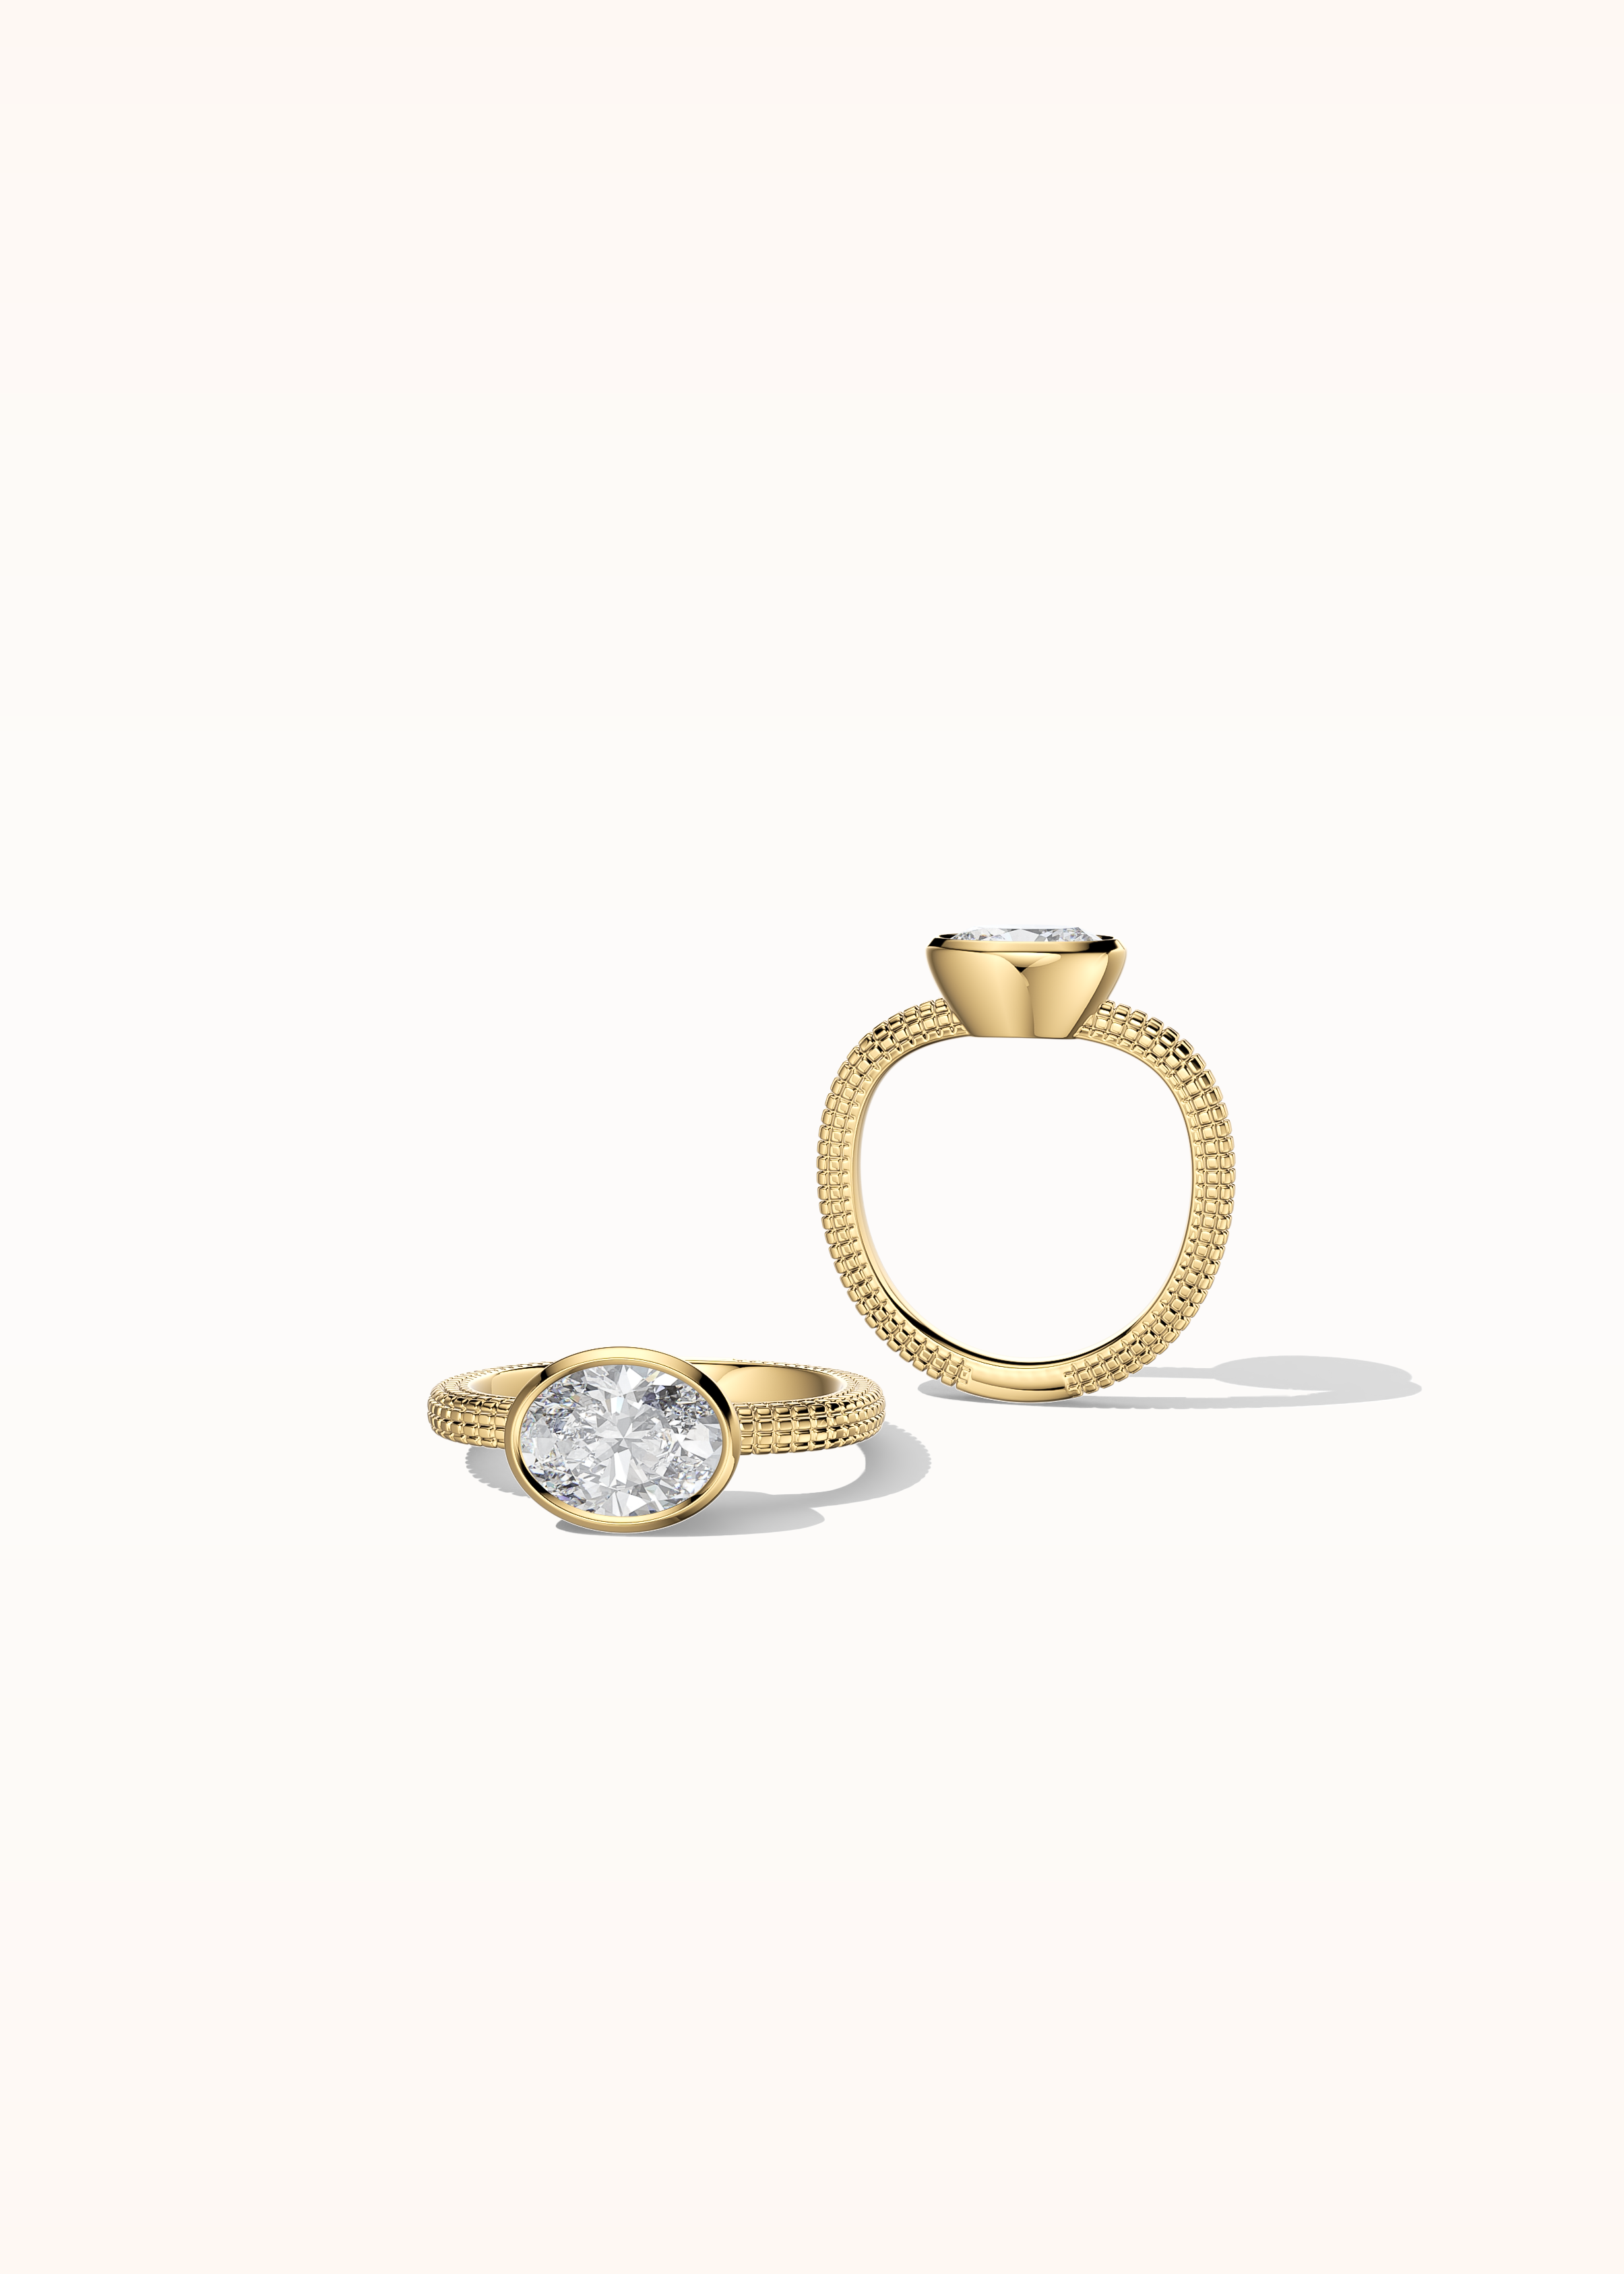 Ethereal Solitaire Oval Diamond Ring